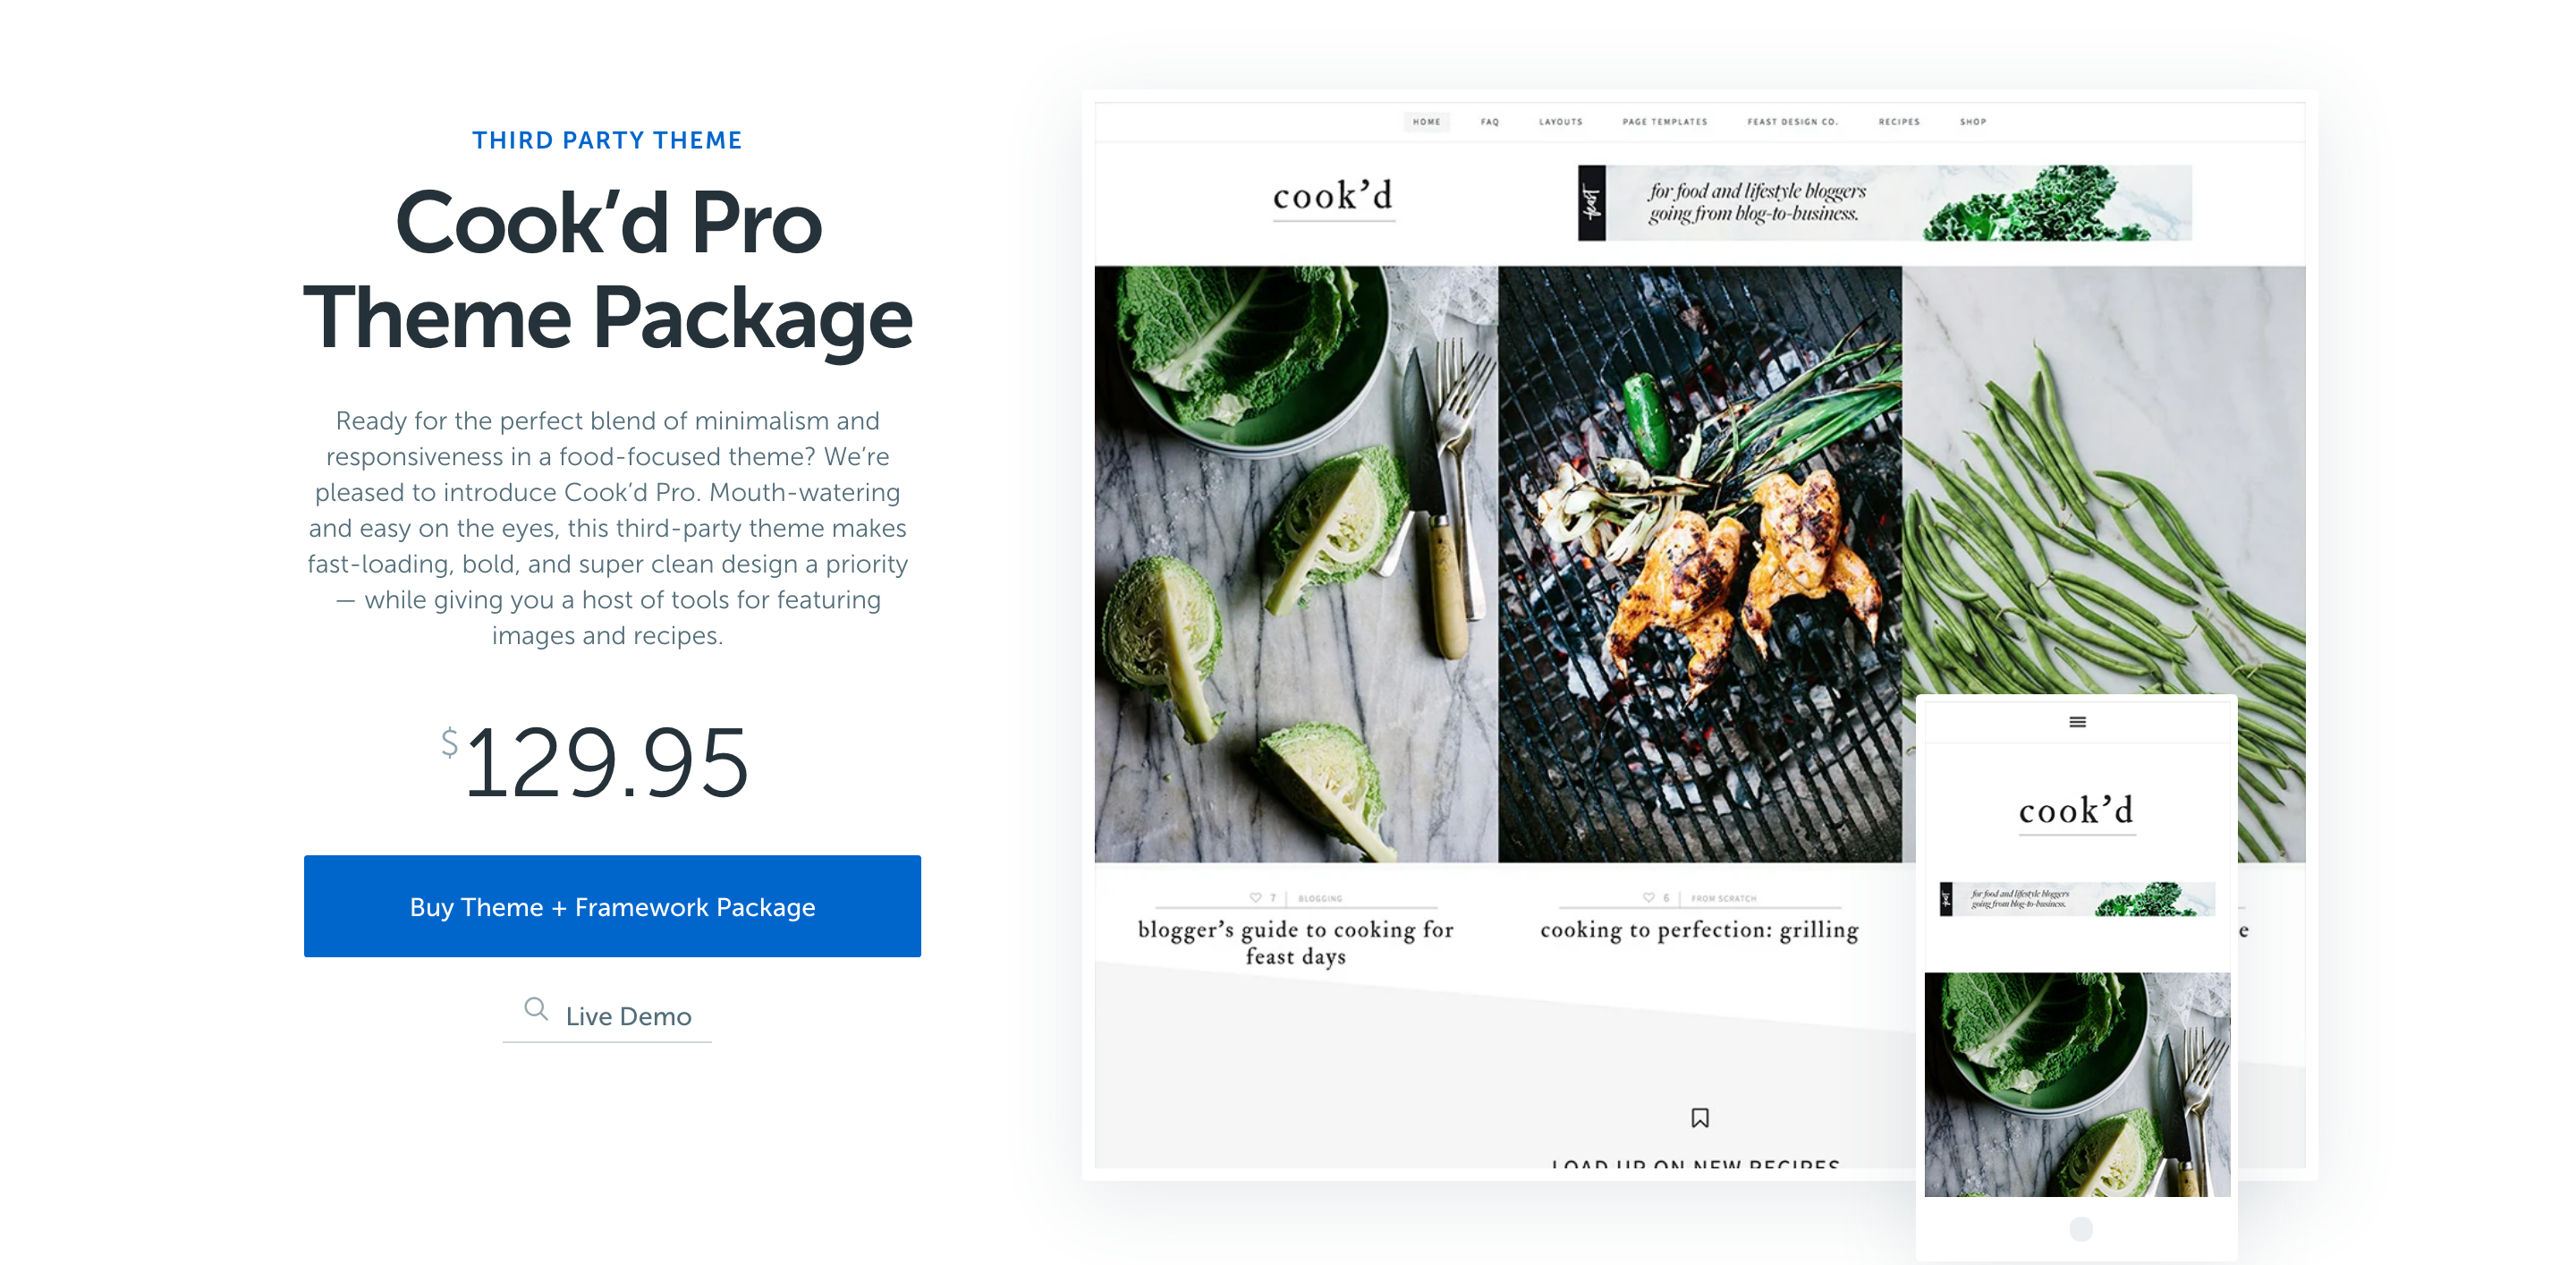 Cook’d Pro Theme by Feast Design Co.